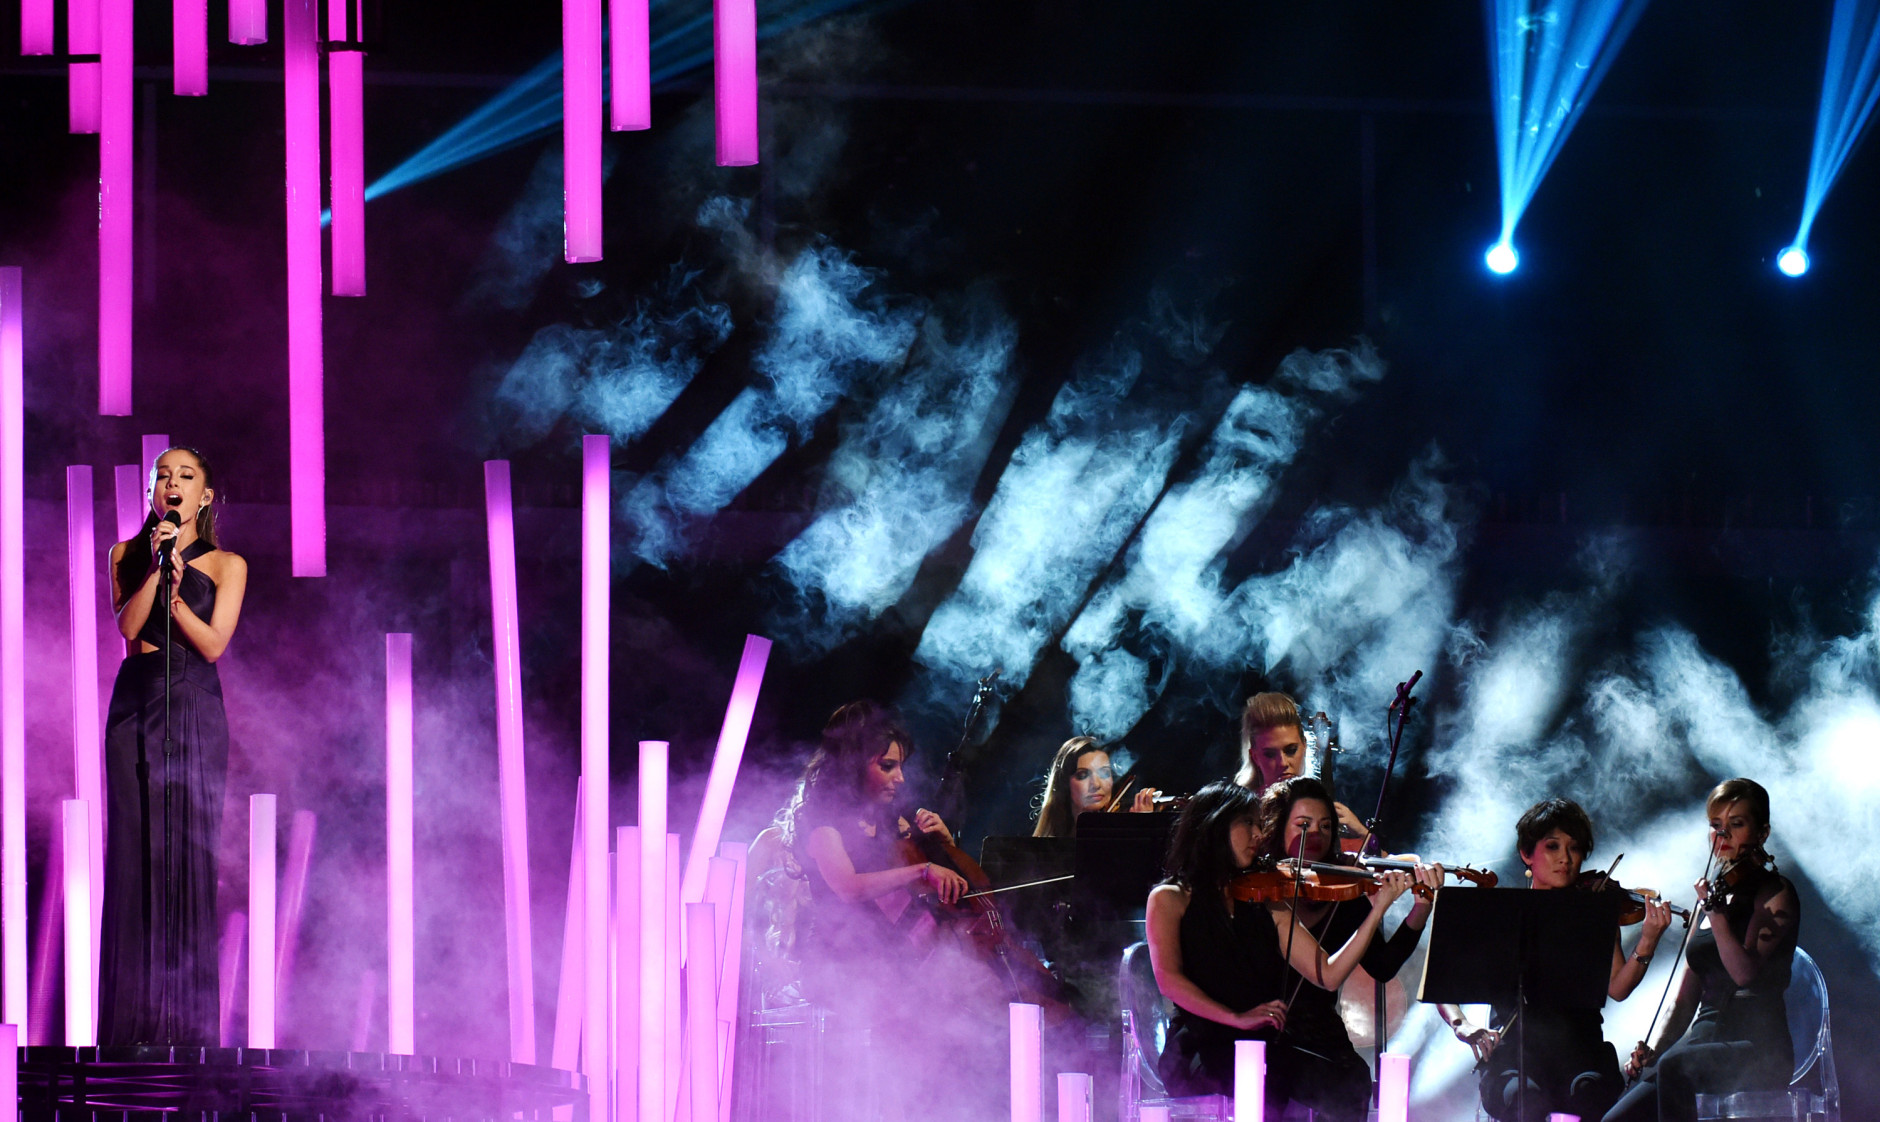 Ariana Grande performs at the 57th annual Grammy Awards on Sunday, Feb. 8, 2015, in Los Angeles. (Photo by John Shearer/Invision/AP)